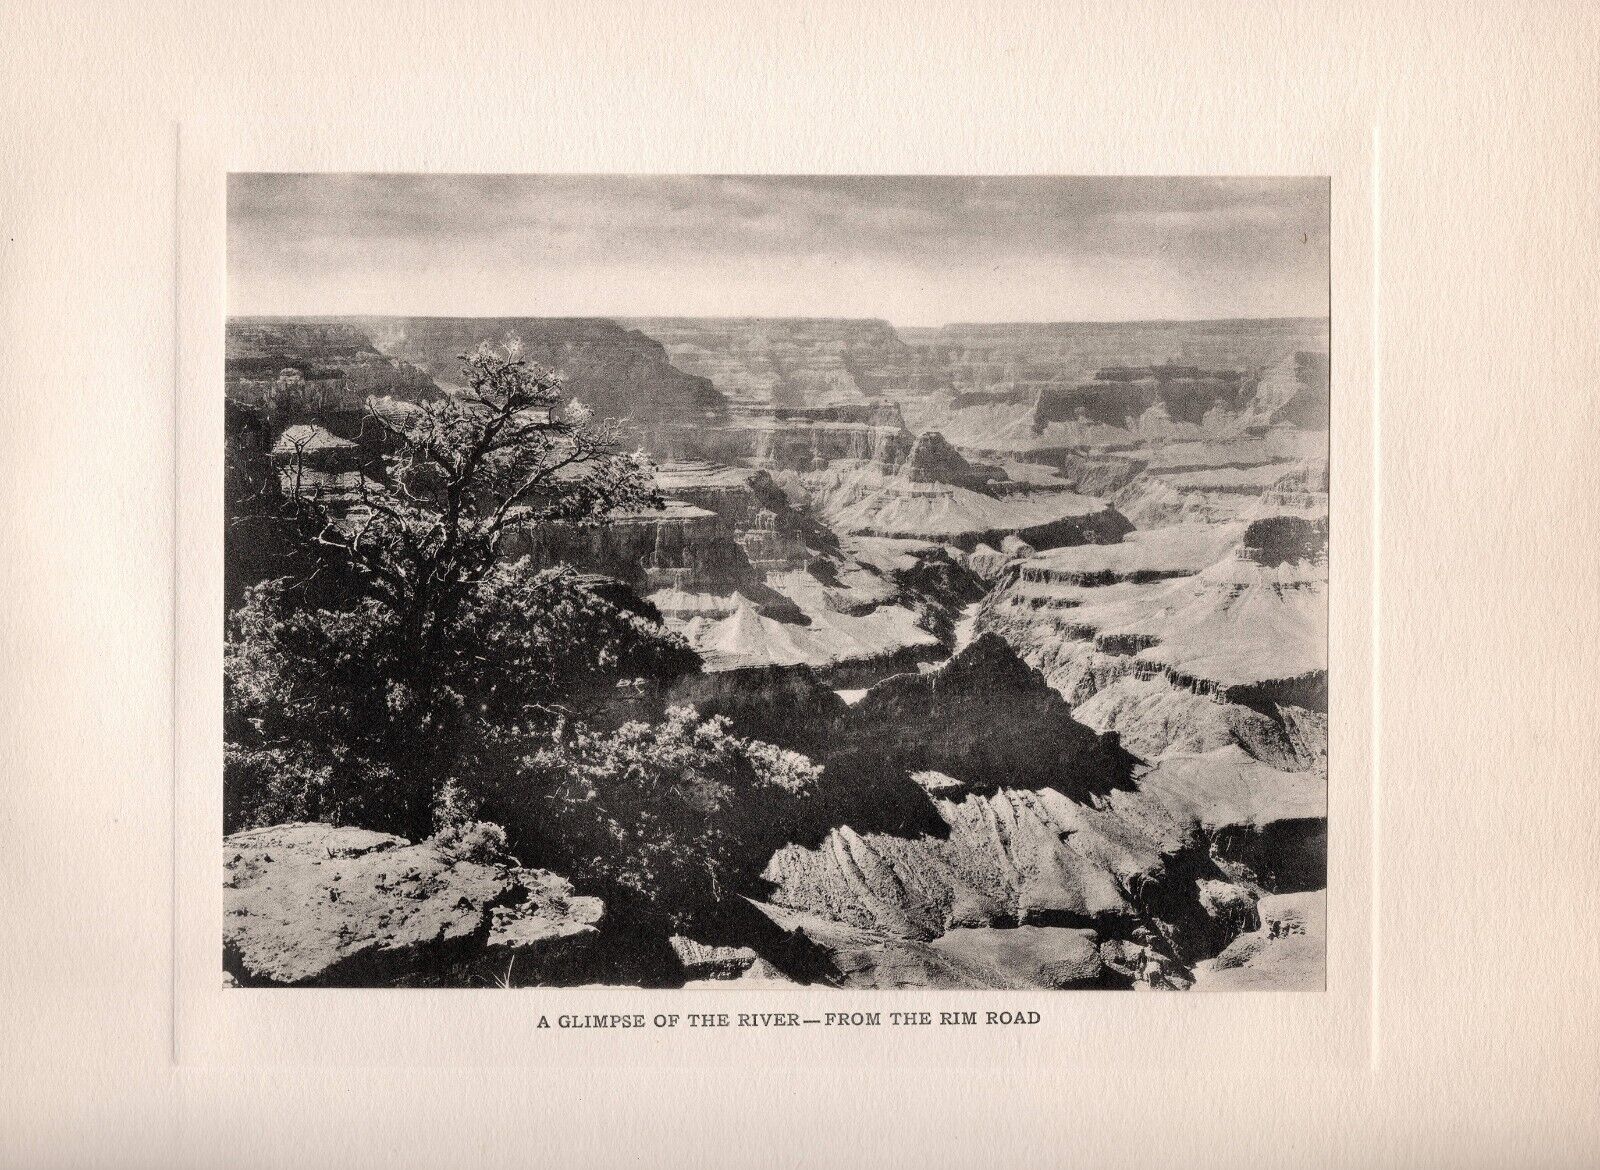 1910 Photogravure, Glimpse of the River from Rim Road, Grand Canyon, Karl Moon